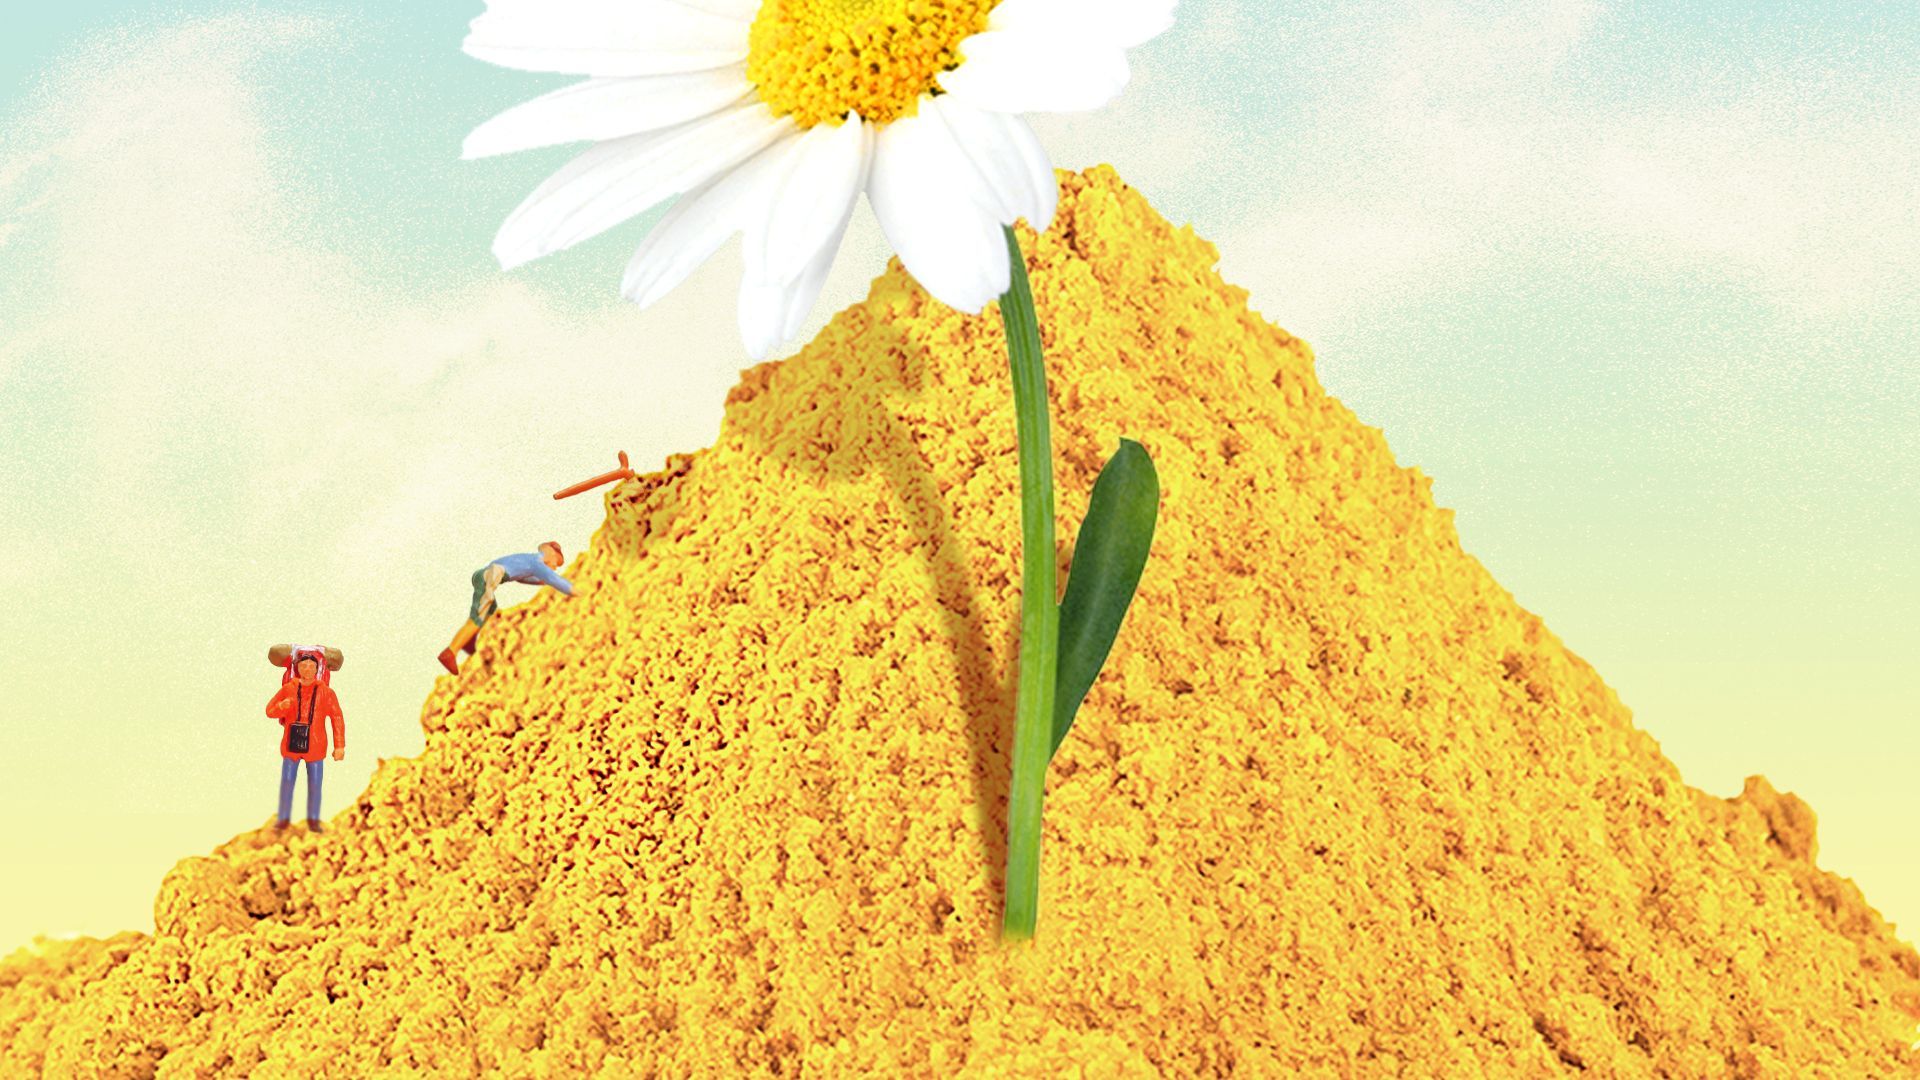 Illustration of tiny toy people climbing up a mountain of pollen with a large flower growing from the middle